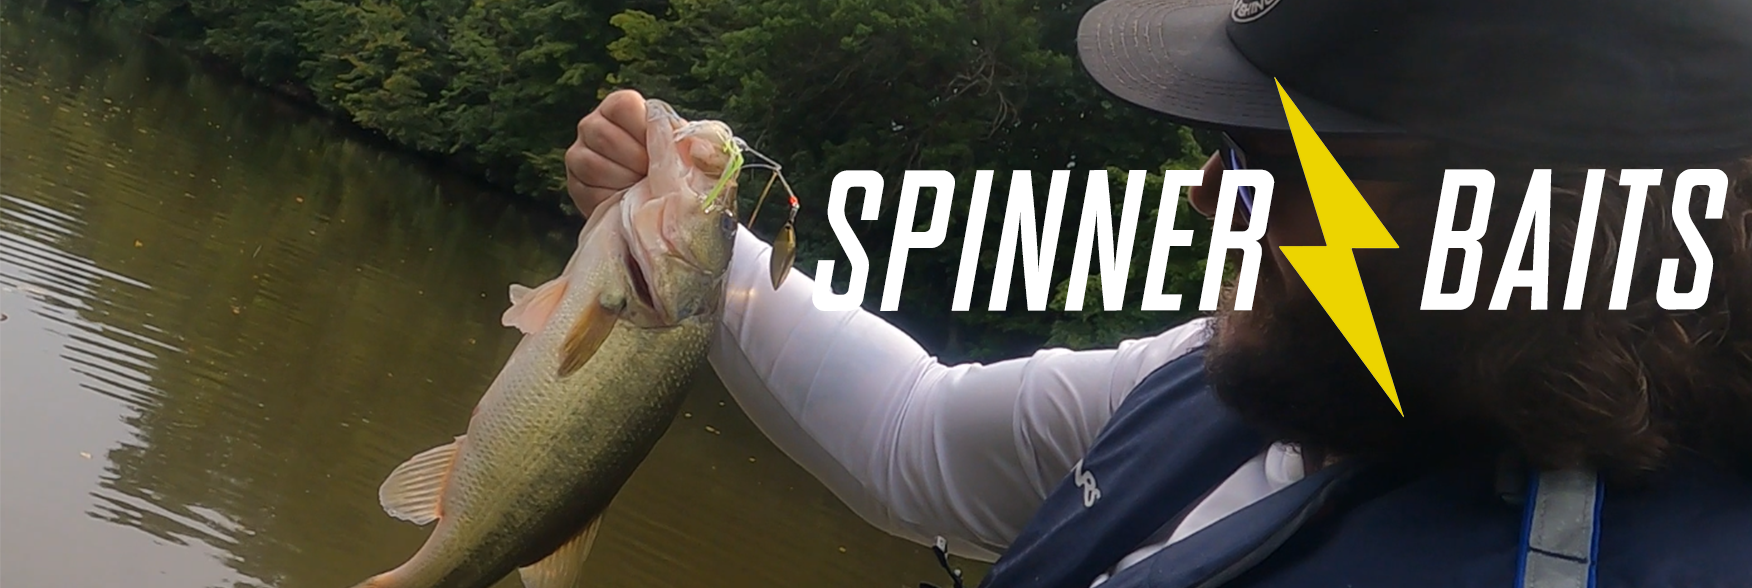 Spinnerbaits  Save More Outdoors